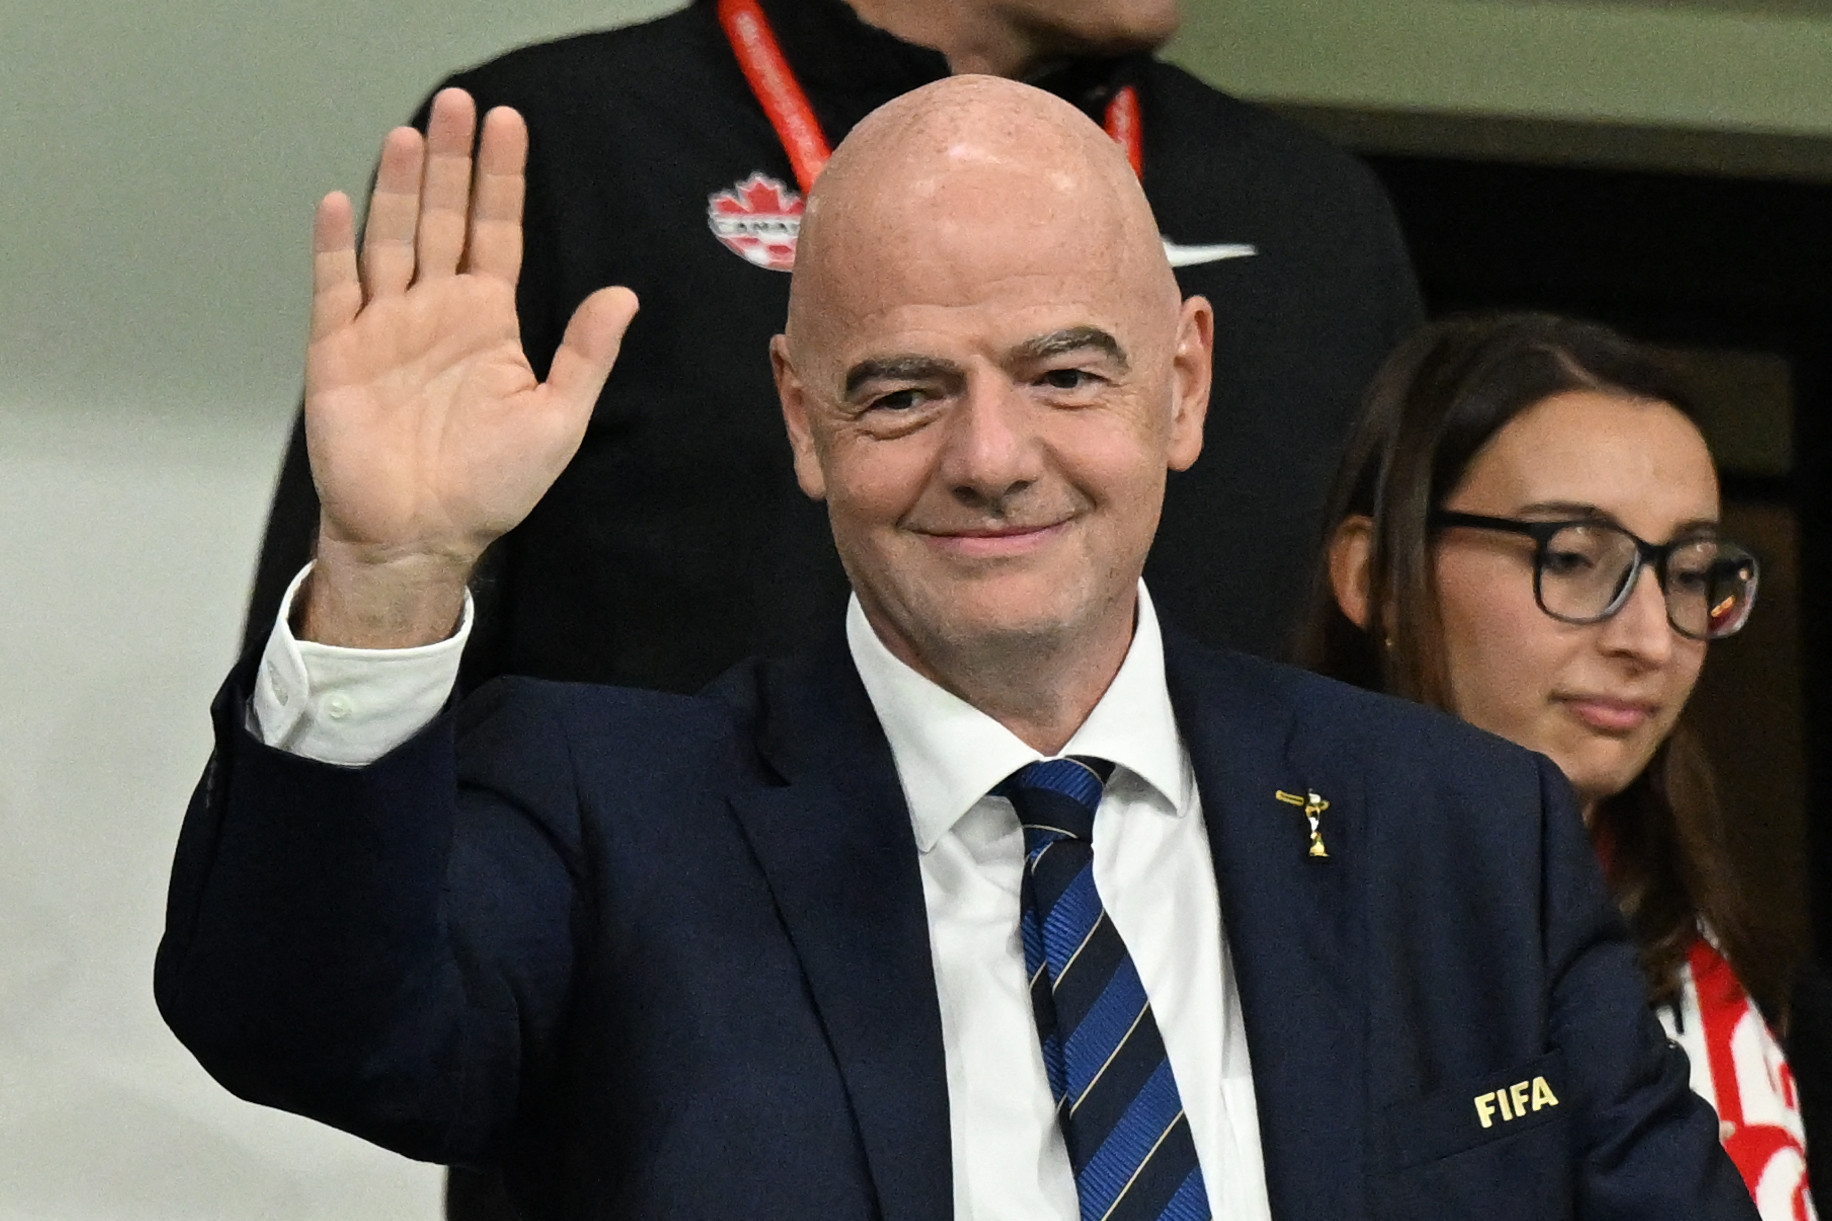 Gianni Infantino was present at Australia's match against Canada after spending nearly a week away from the tournament ©Getty Images